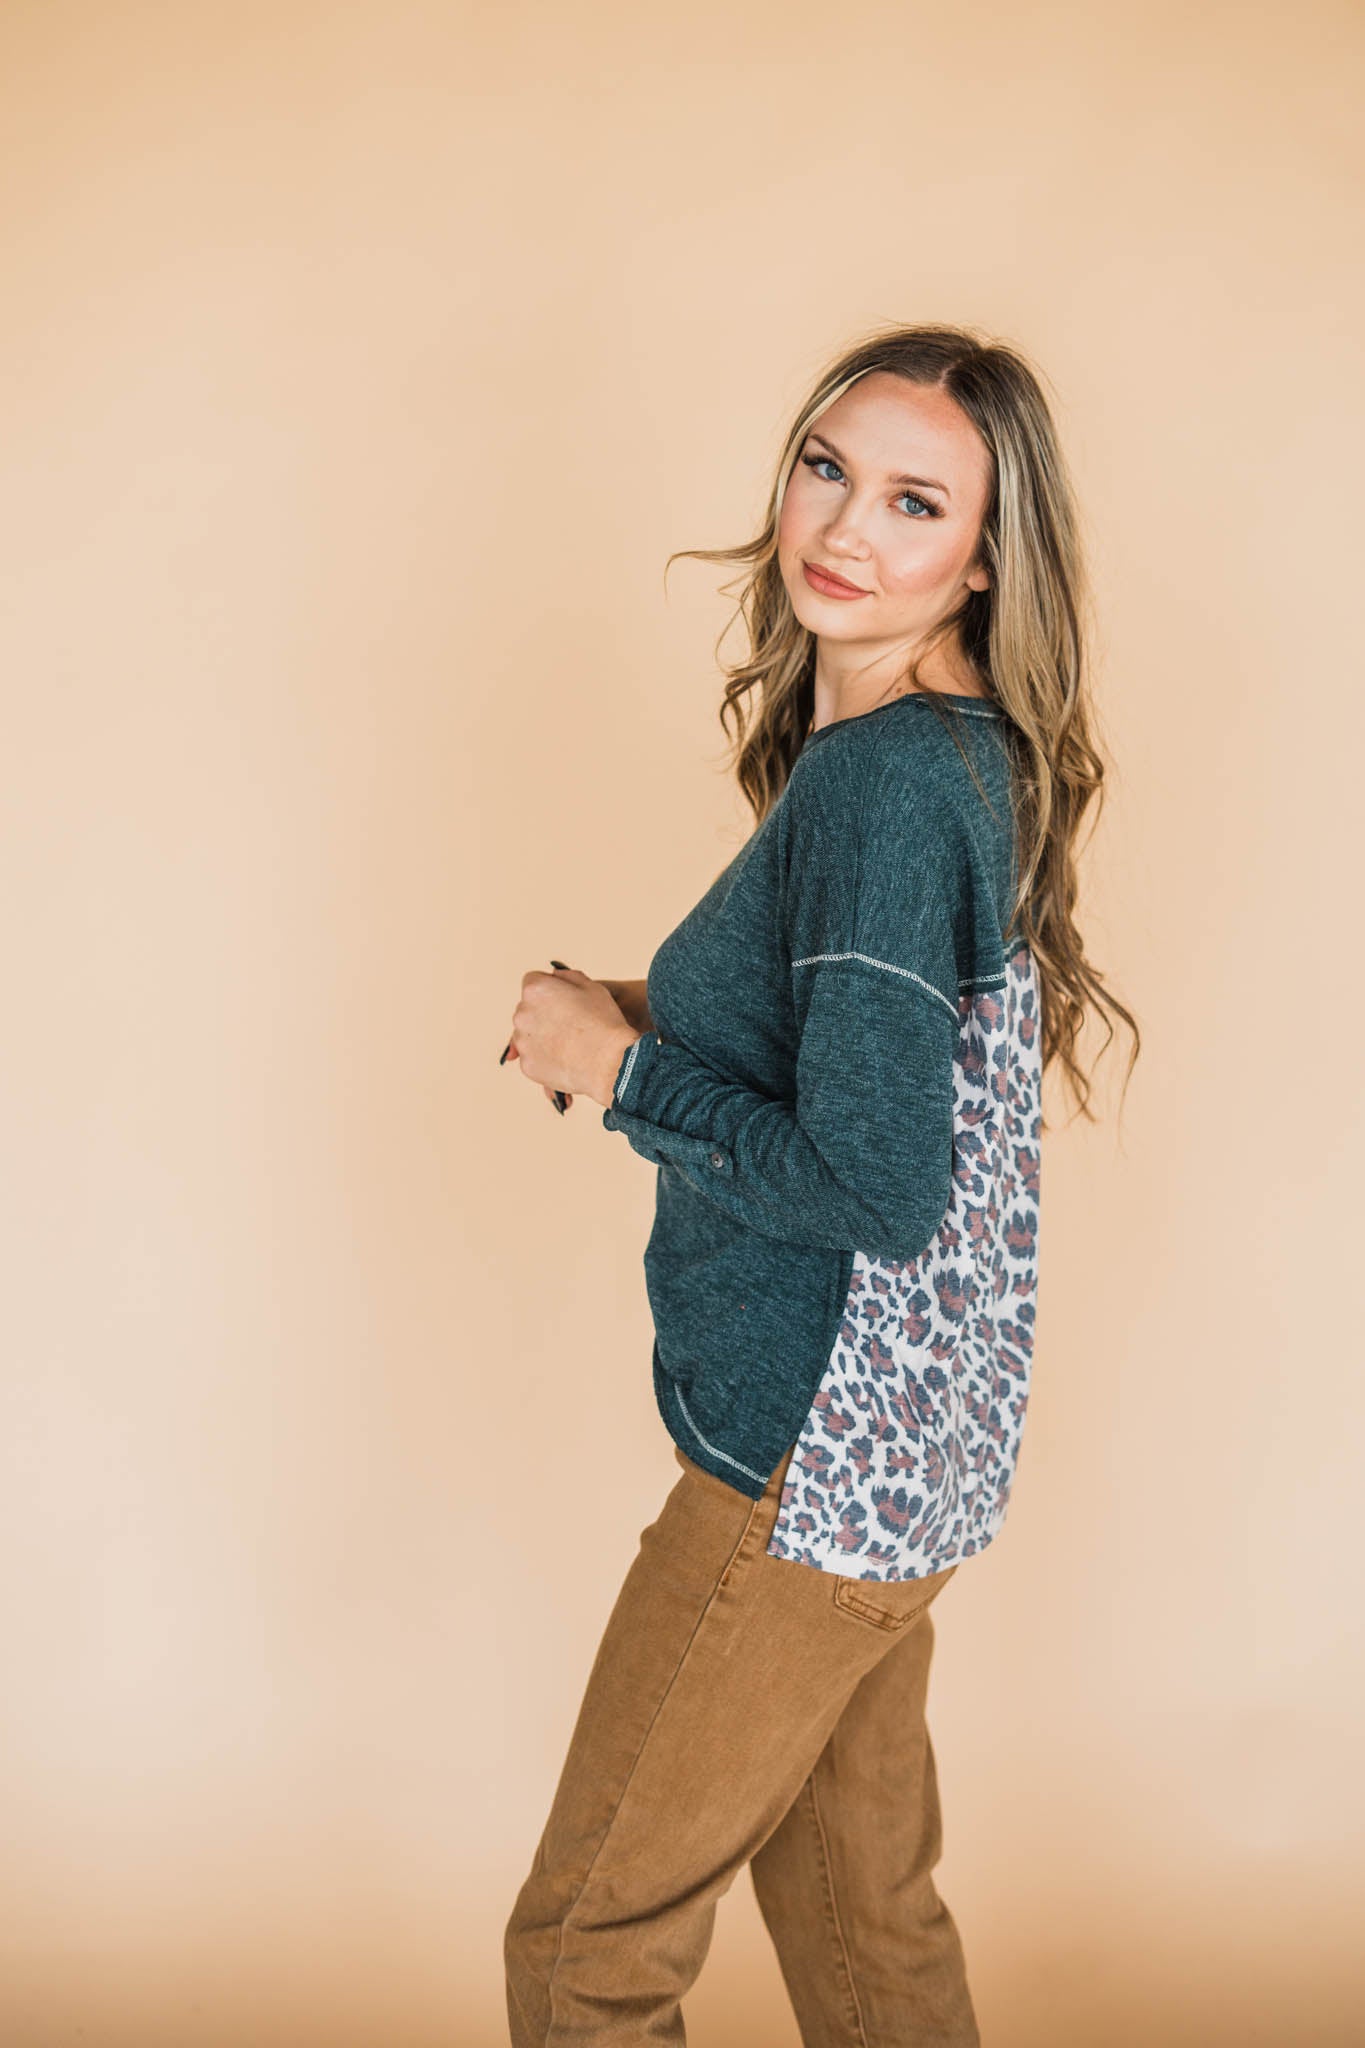 Teal Green Knit Top with Animal Print Contrast